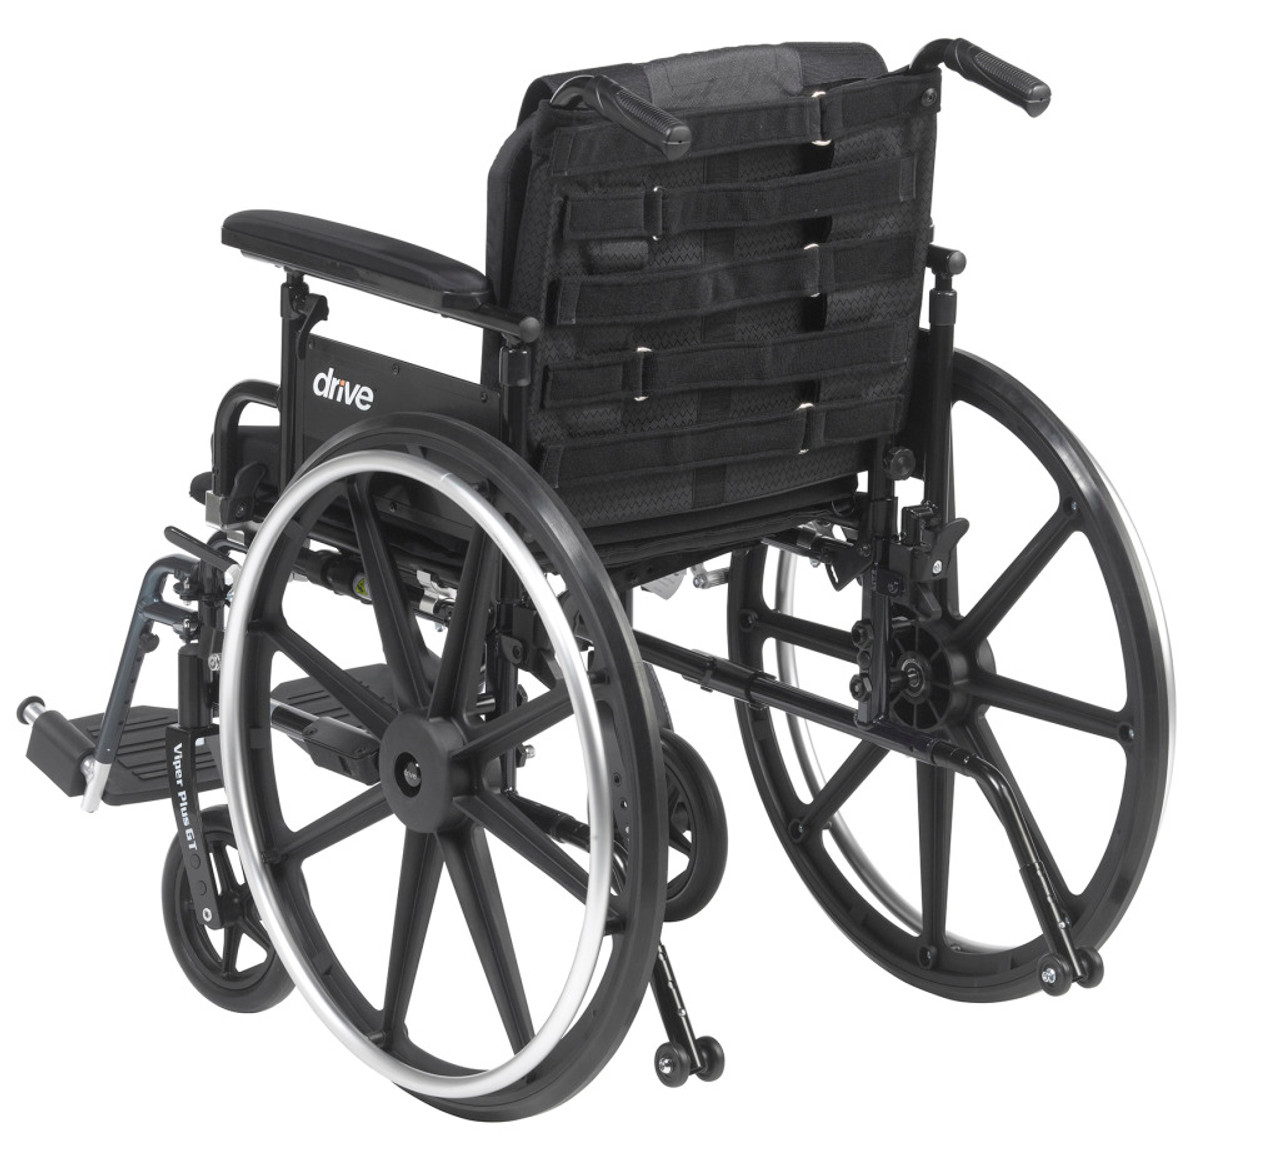 Universal Adjustable Tension, General Use, Wheelchair Back Cushion